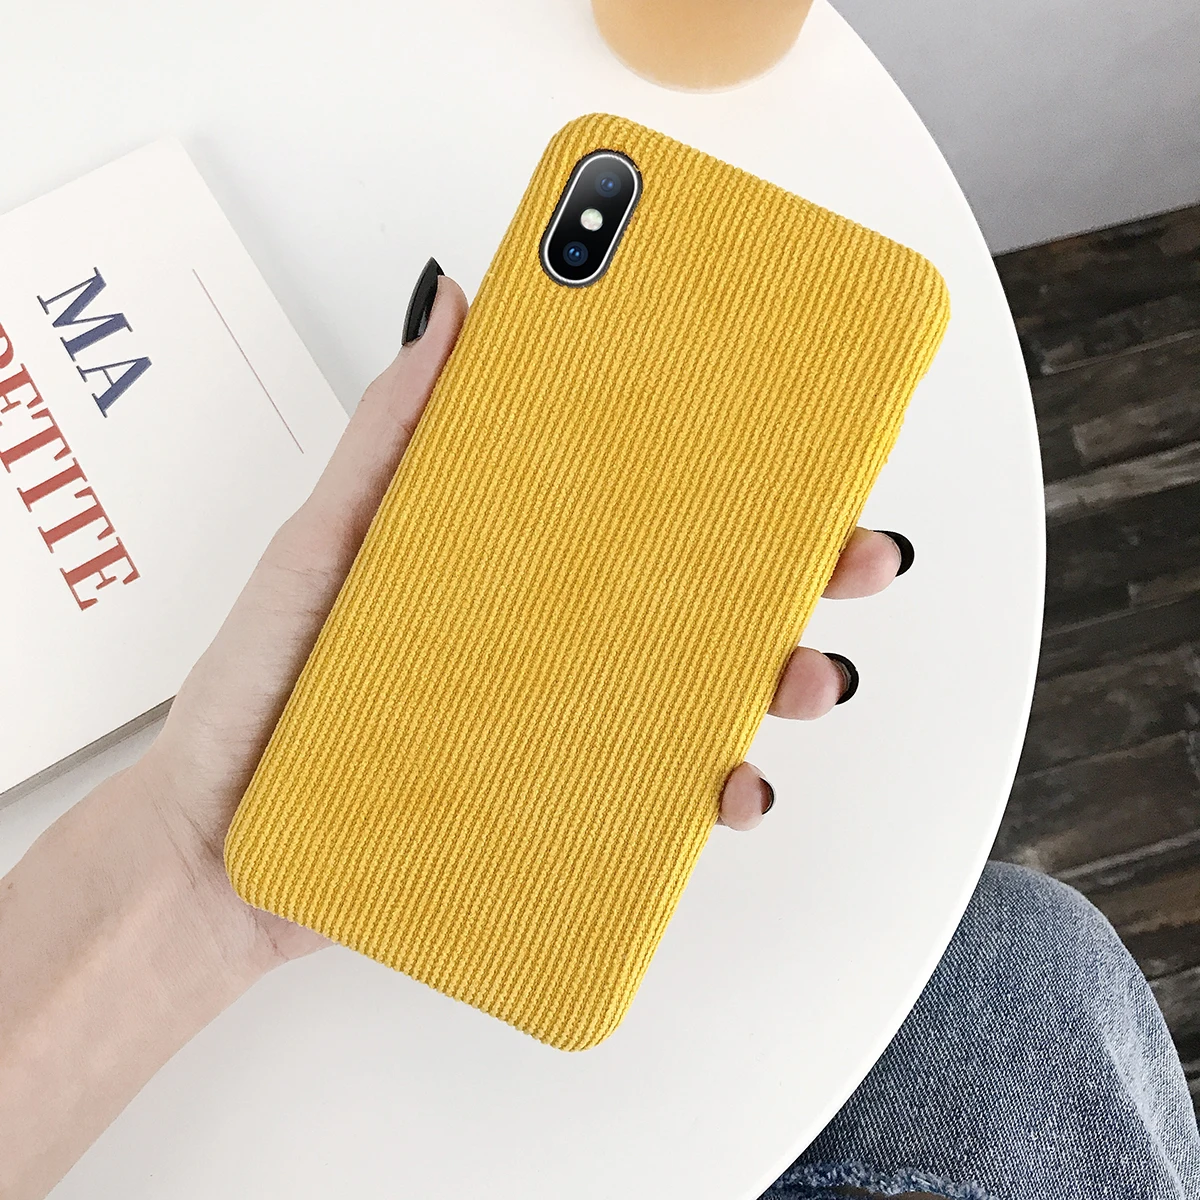 Ottwn Phone Case For iPhone 11 X XR XS Max Corduroy Cloth Texture Case For iPhone 6 6s 7 8 Plus Warm Fabric Fuzzy Soft PU Cover - Цвет: Цвет: желтый